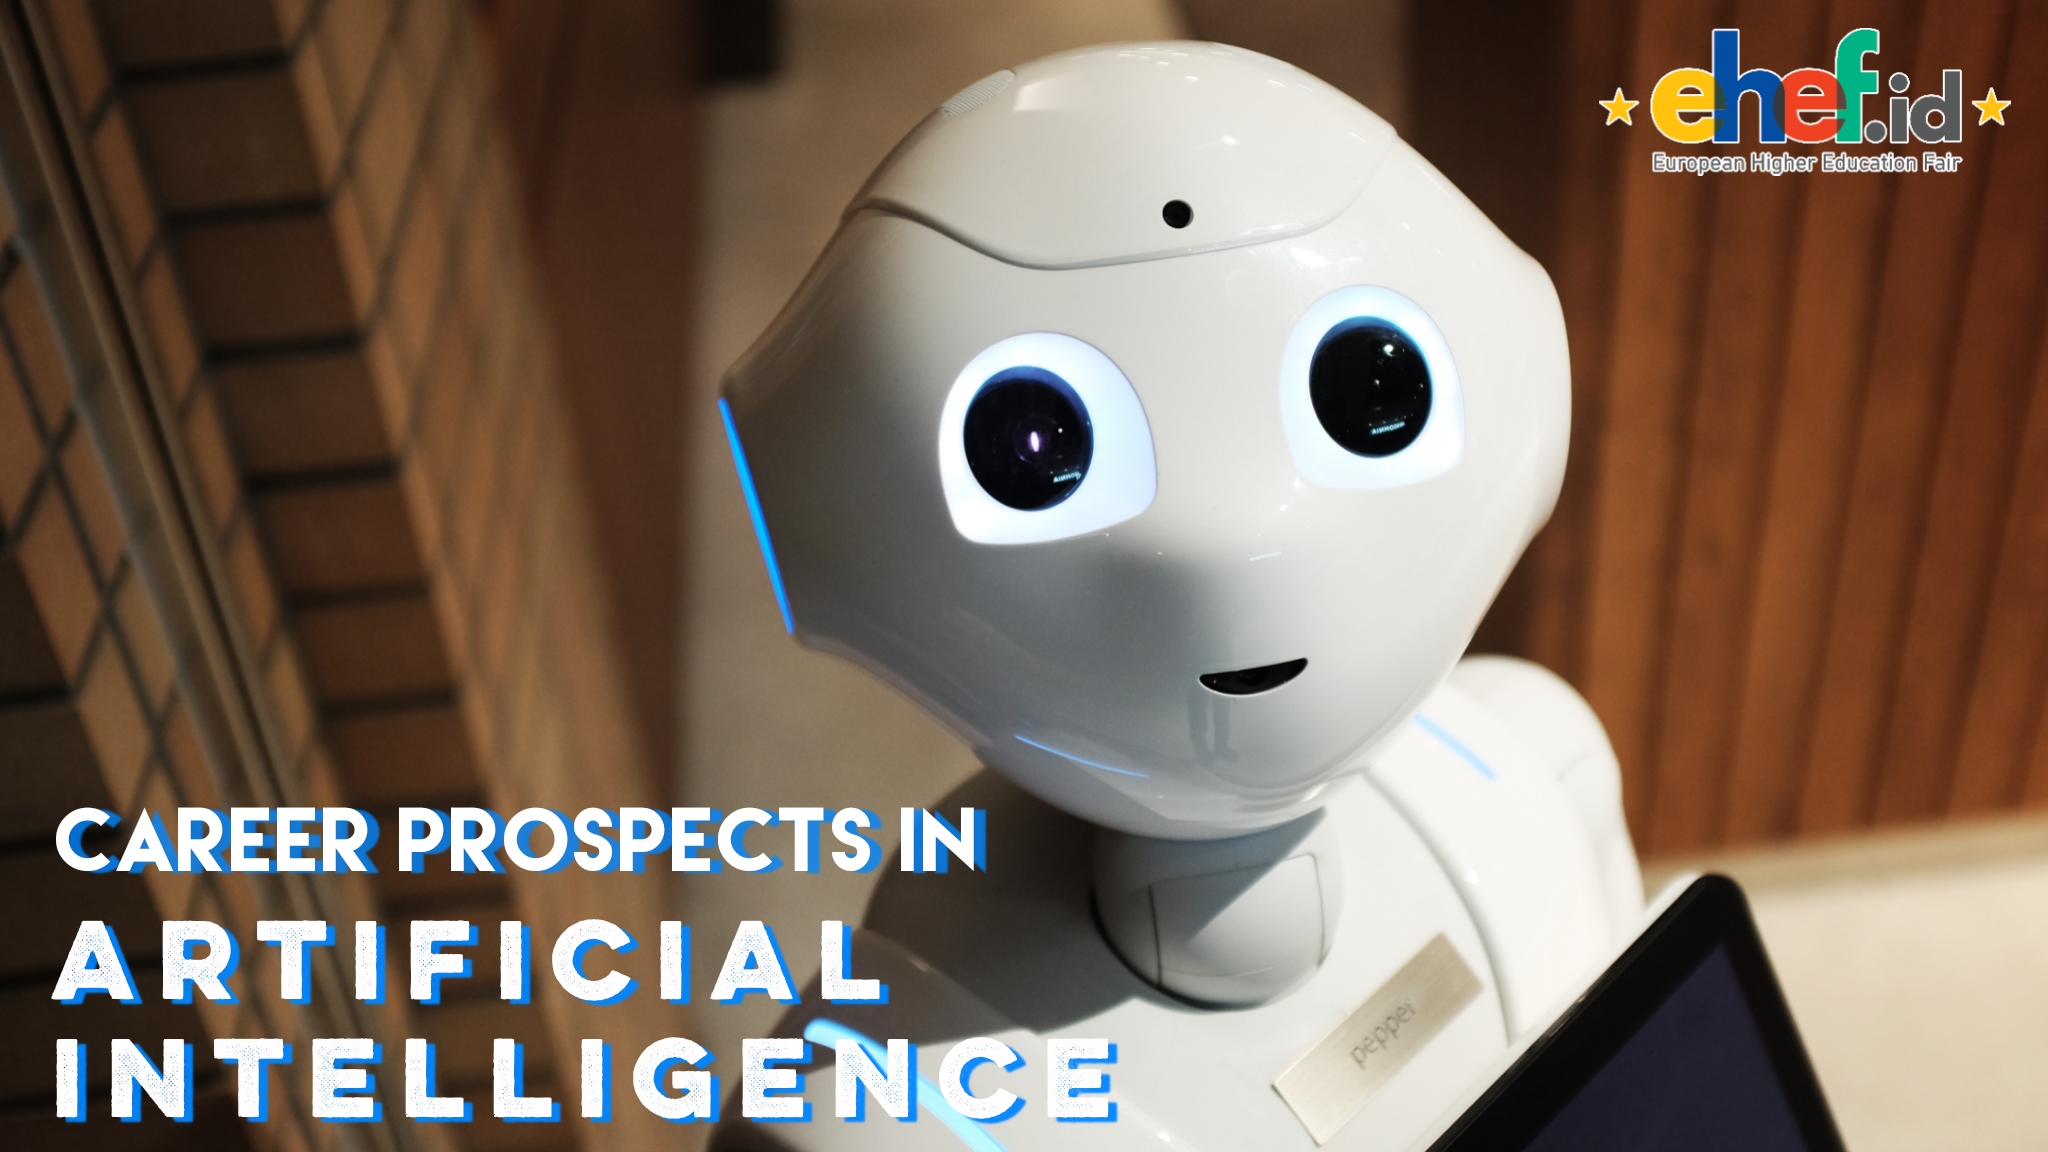 Career Prospects in Artificial Intelligence